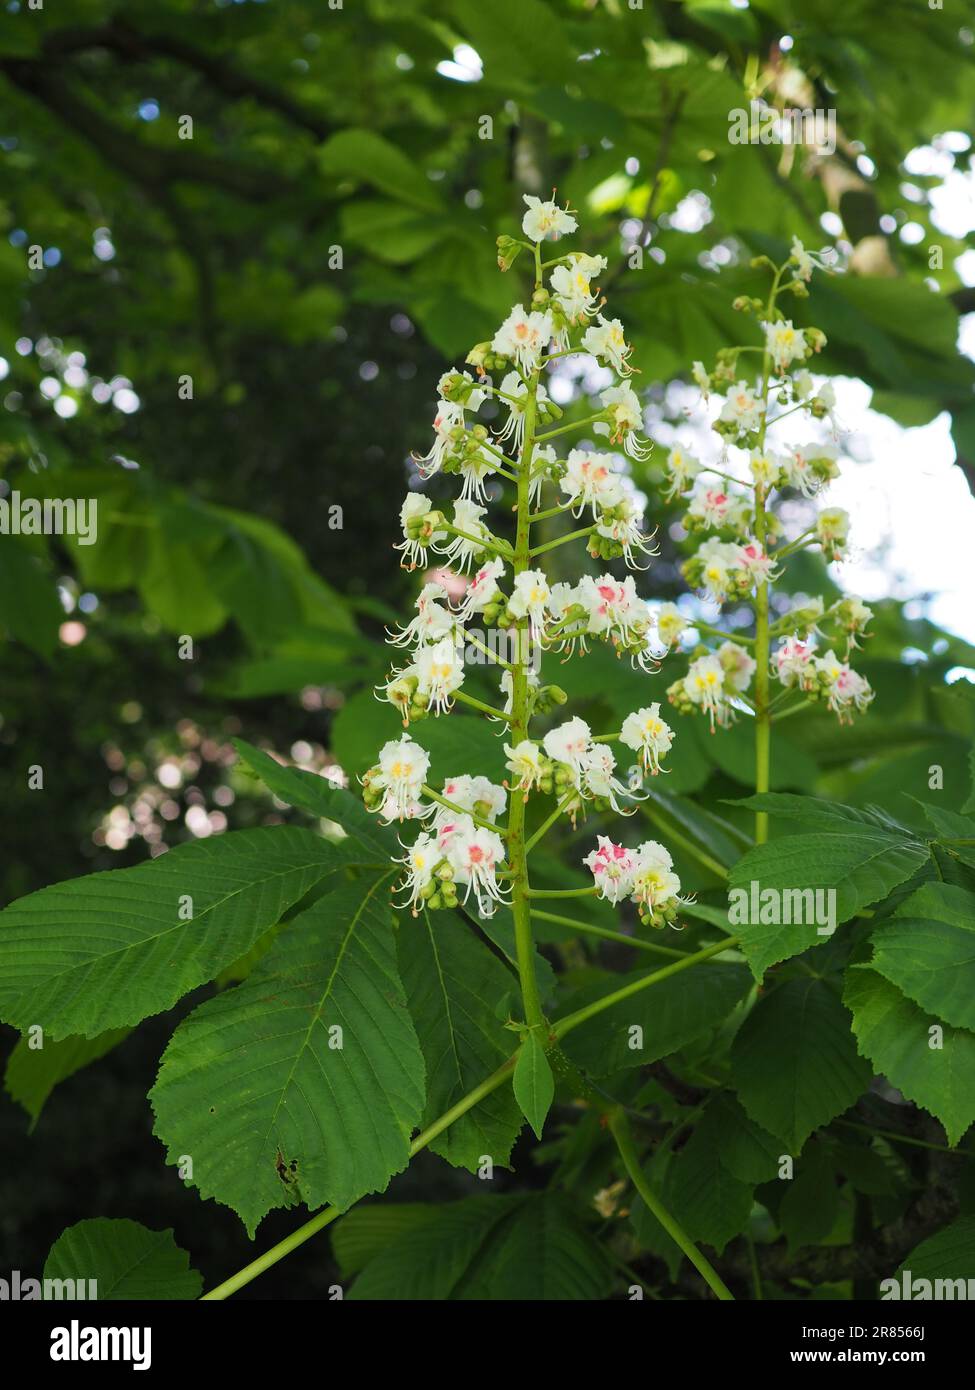 Close up of a white and pink flower panicle of the European horse chestnut tree (Aesculus hippocastanum) in spring in the UK Stock Photo